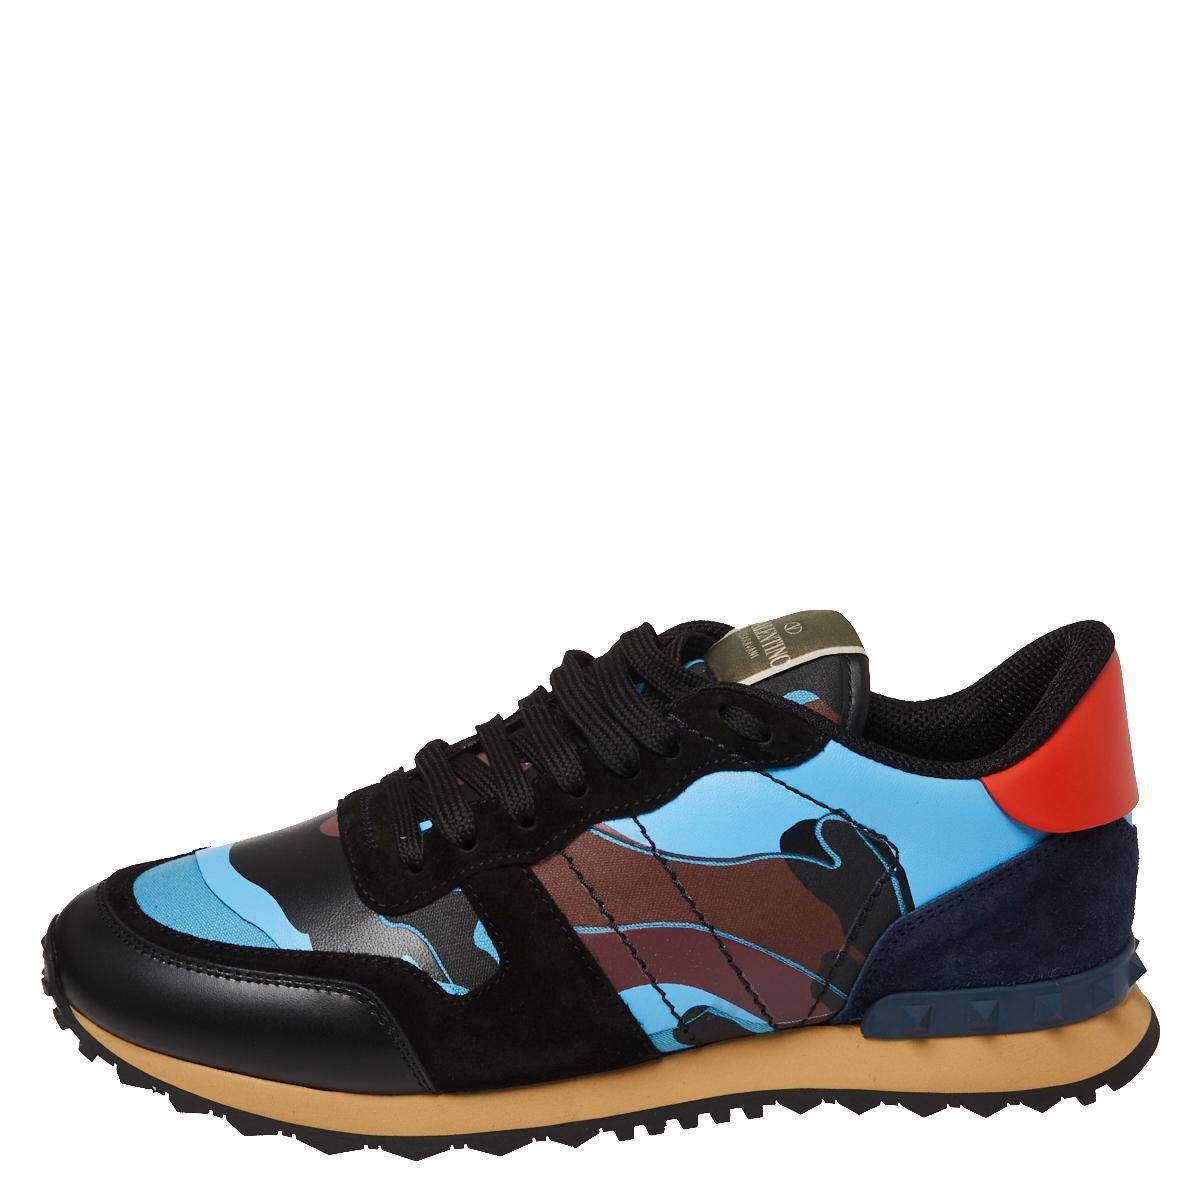 Valentino Multicolor Fabric and Leather Camouflage Rockrunner Sneakers Size 41 2